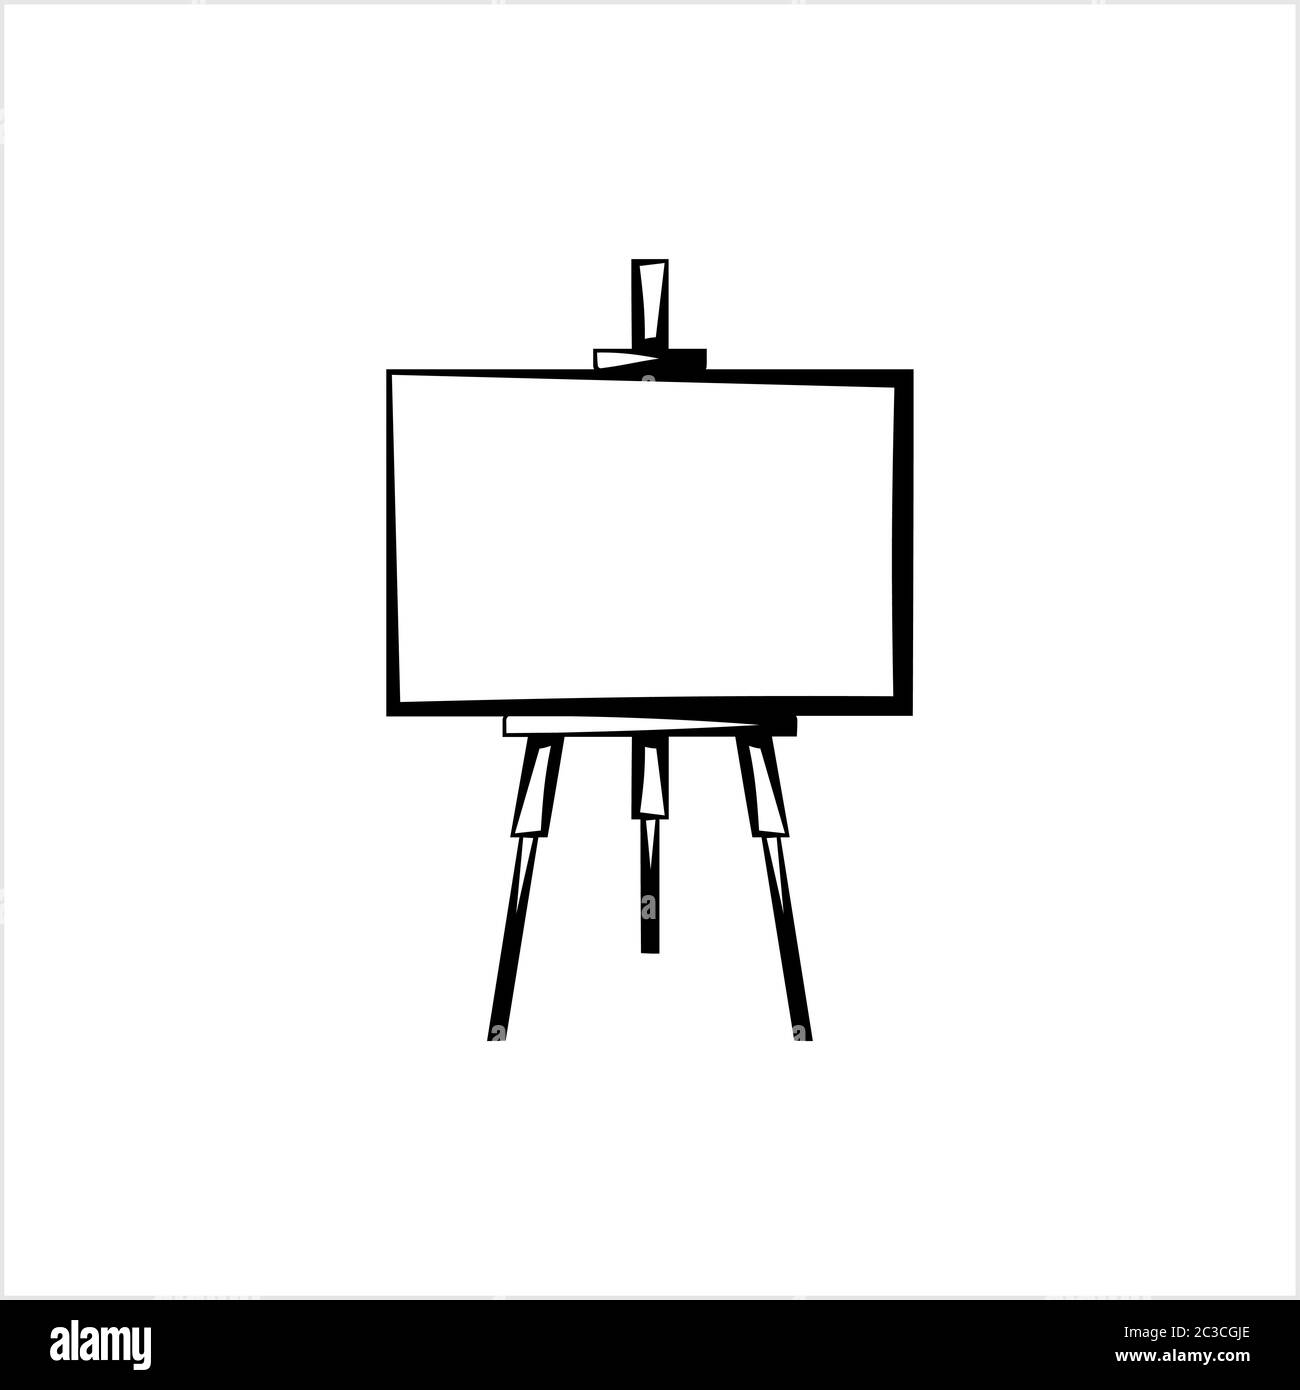 Monochrome icon set, drawing tools, wooden easel with paints and